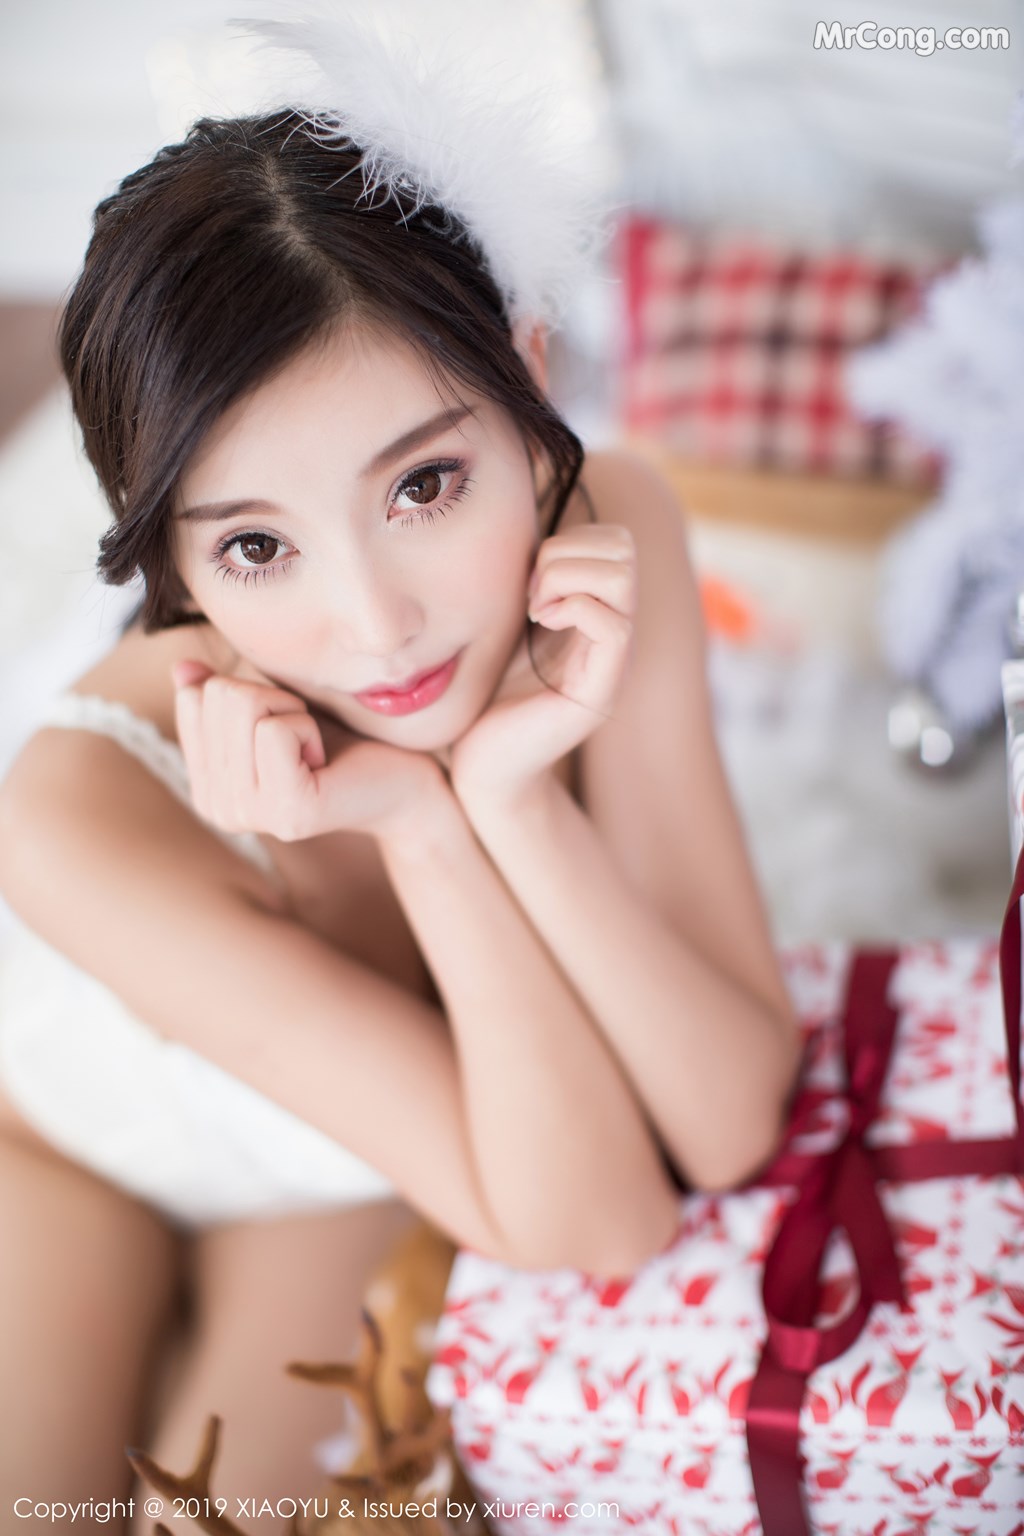 XiaoYu Vol. 5959: Yang Chen Chen (杨晨晨 sugar) (46 pictures)